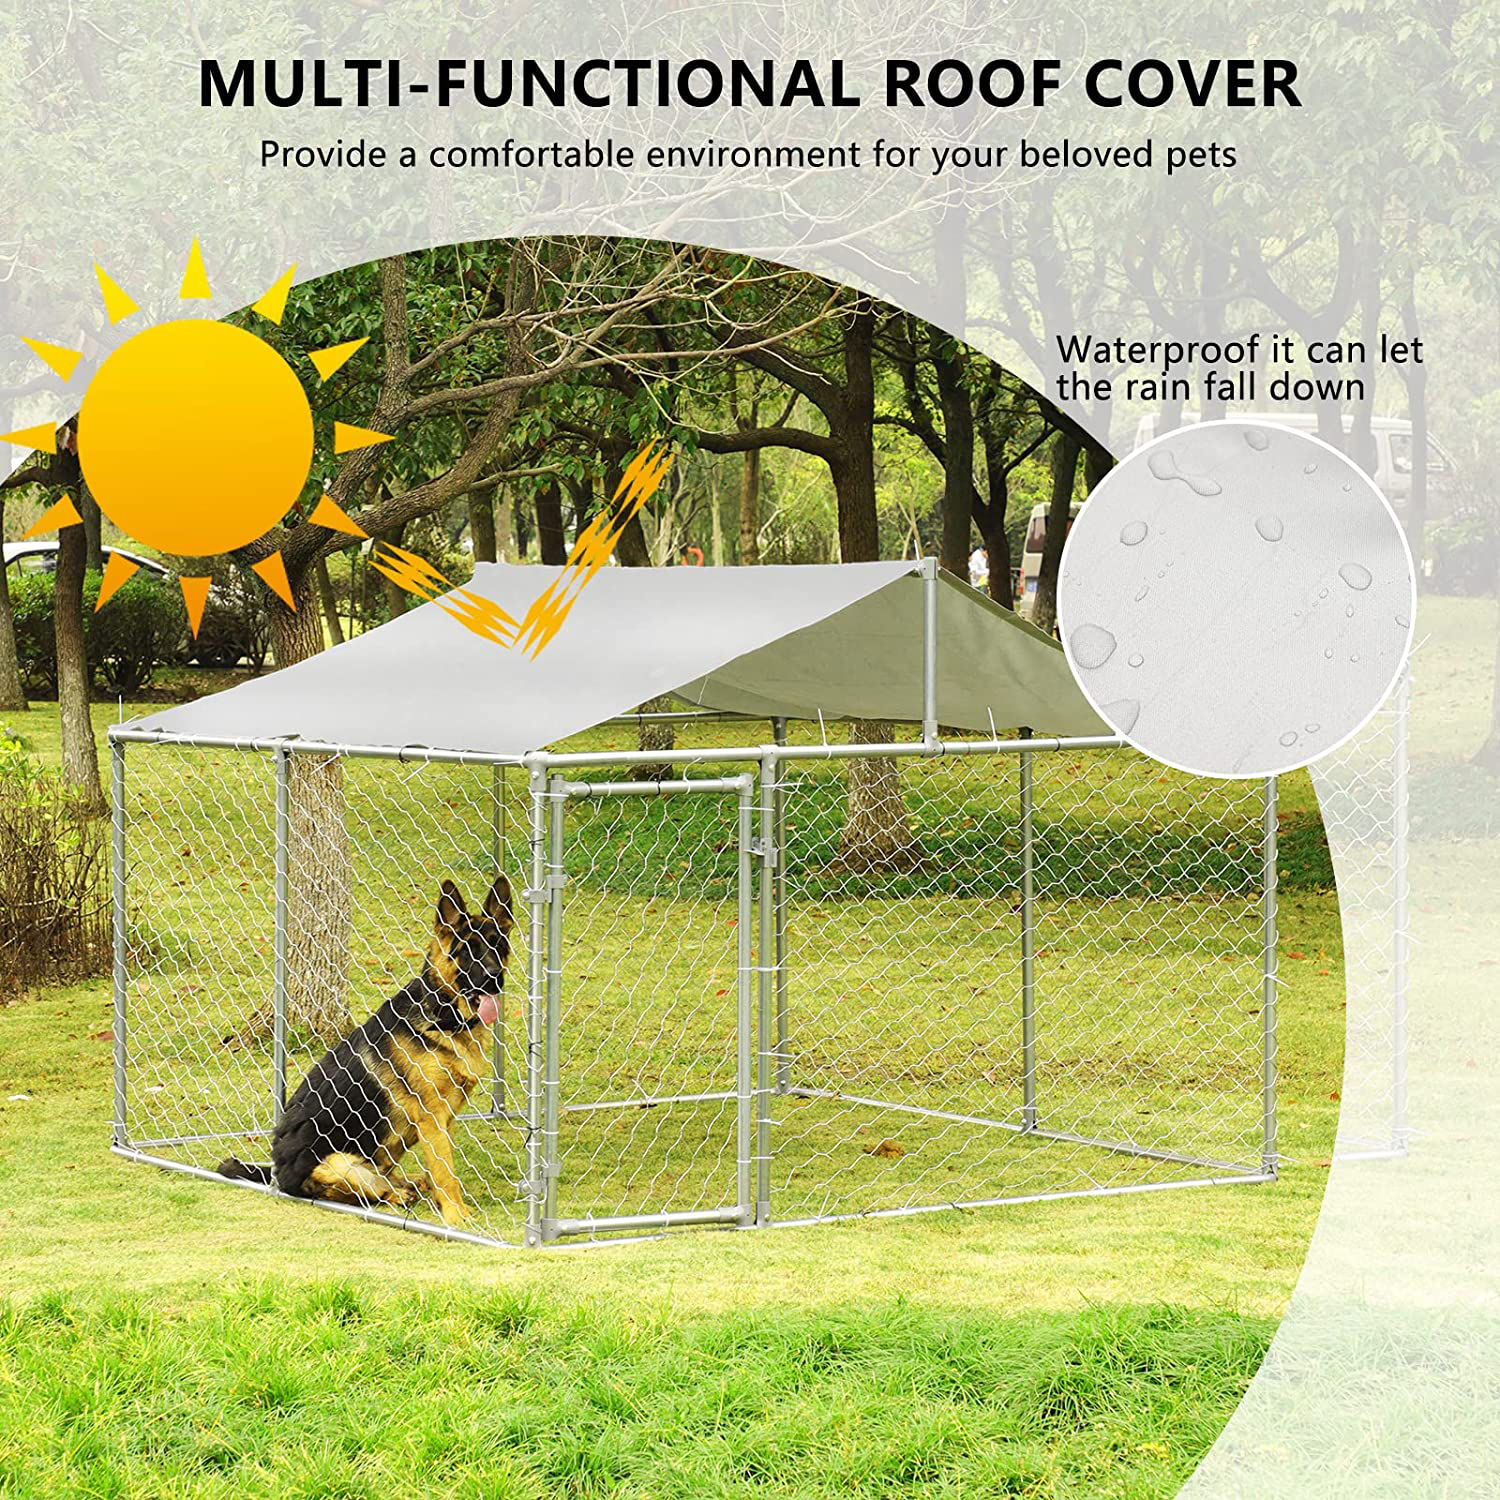 Grepatio Outdoor Dog Kennel,Large Dog Playpen Outdoor Dog Fence for Backyard Dog Run with Waterproof Cover